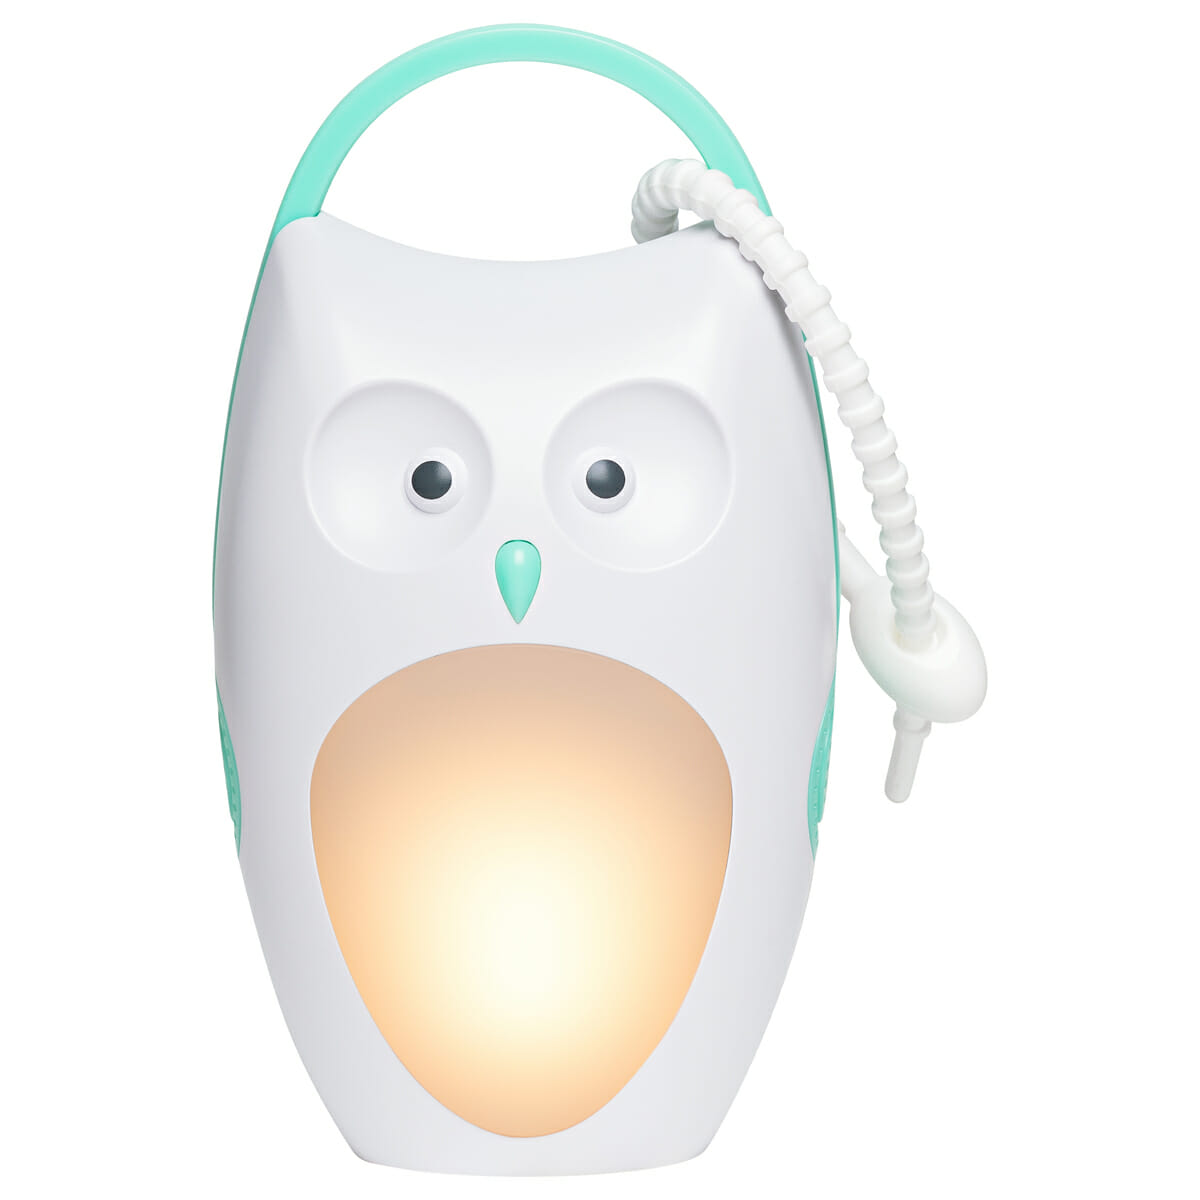 Oricom Portable Sound Soother With Night Light Owl